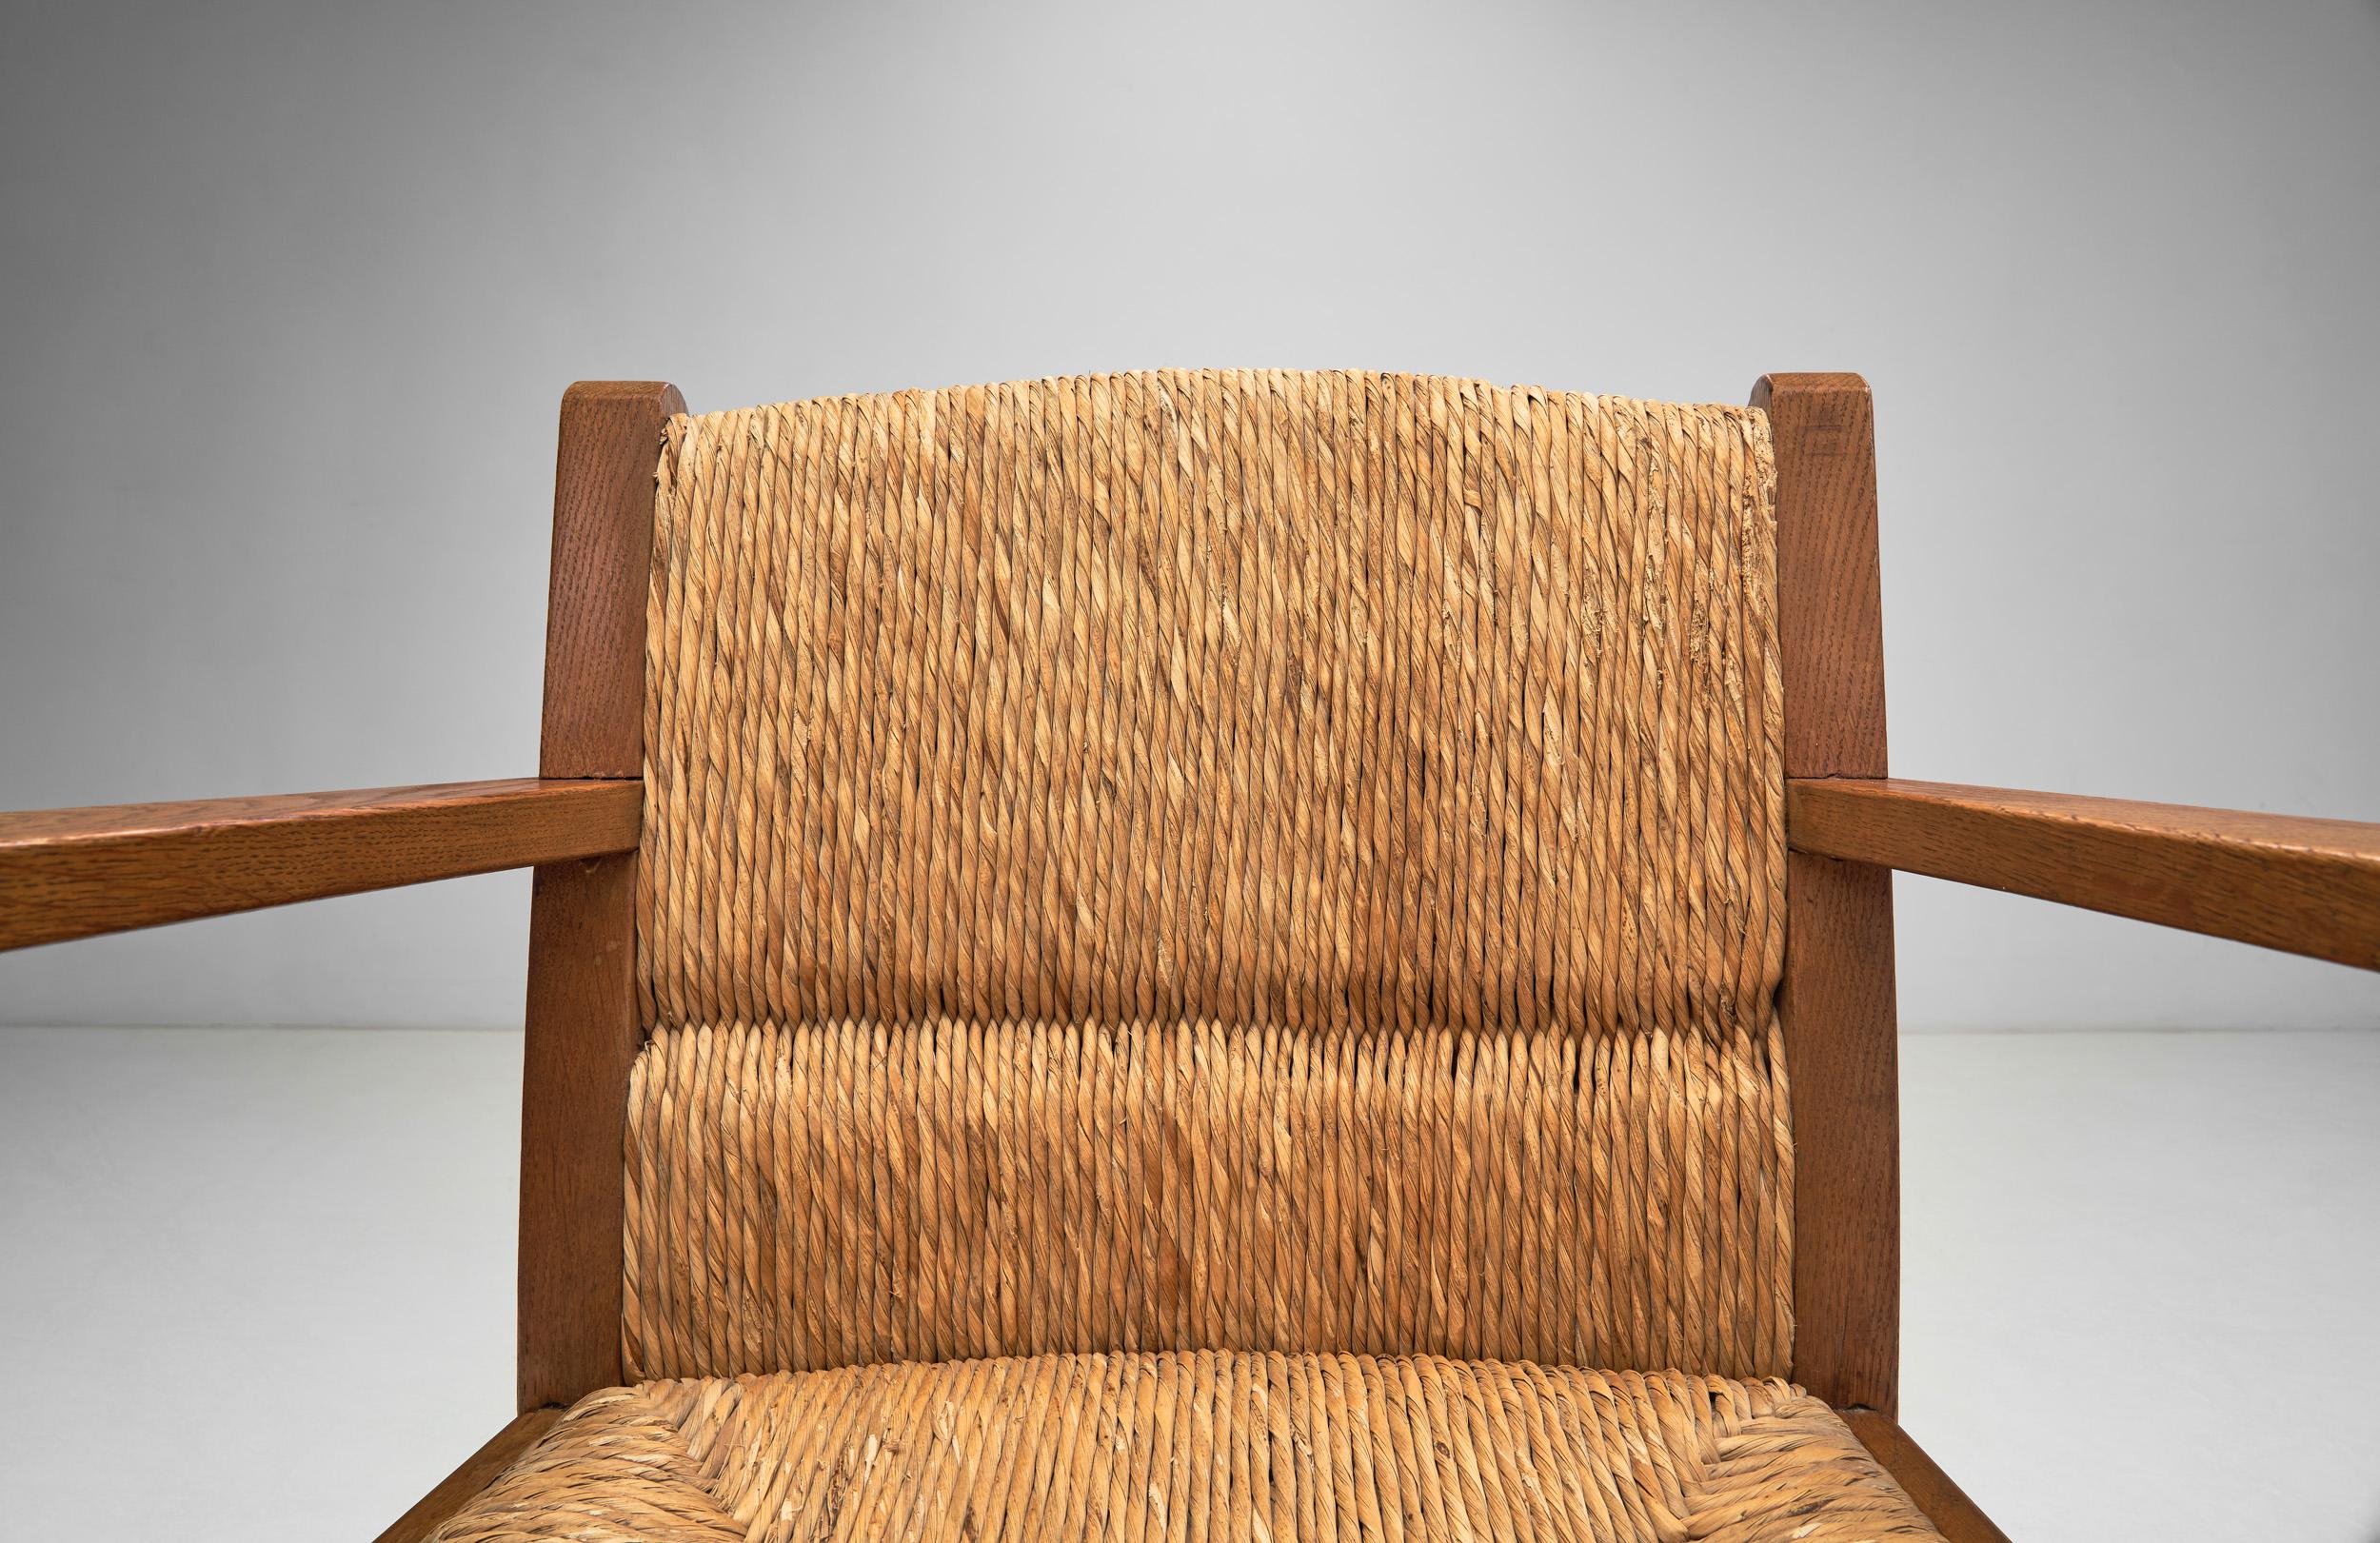 Oak Worpsweder Armchair by Willi Ohler for Erich Schultz, Germany 1920s For Sale 2